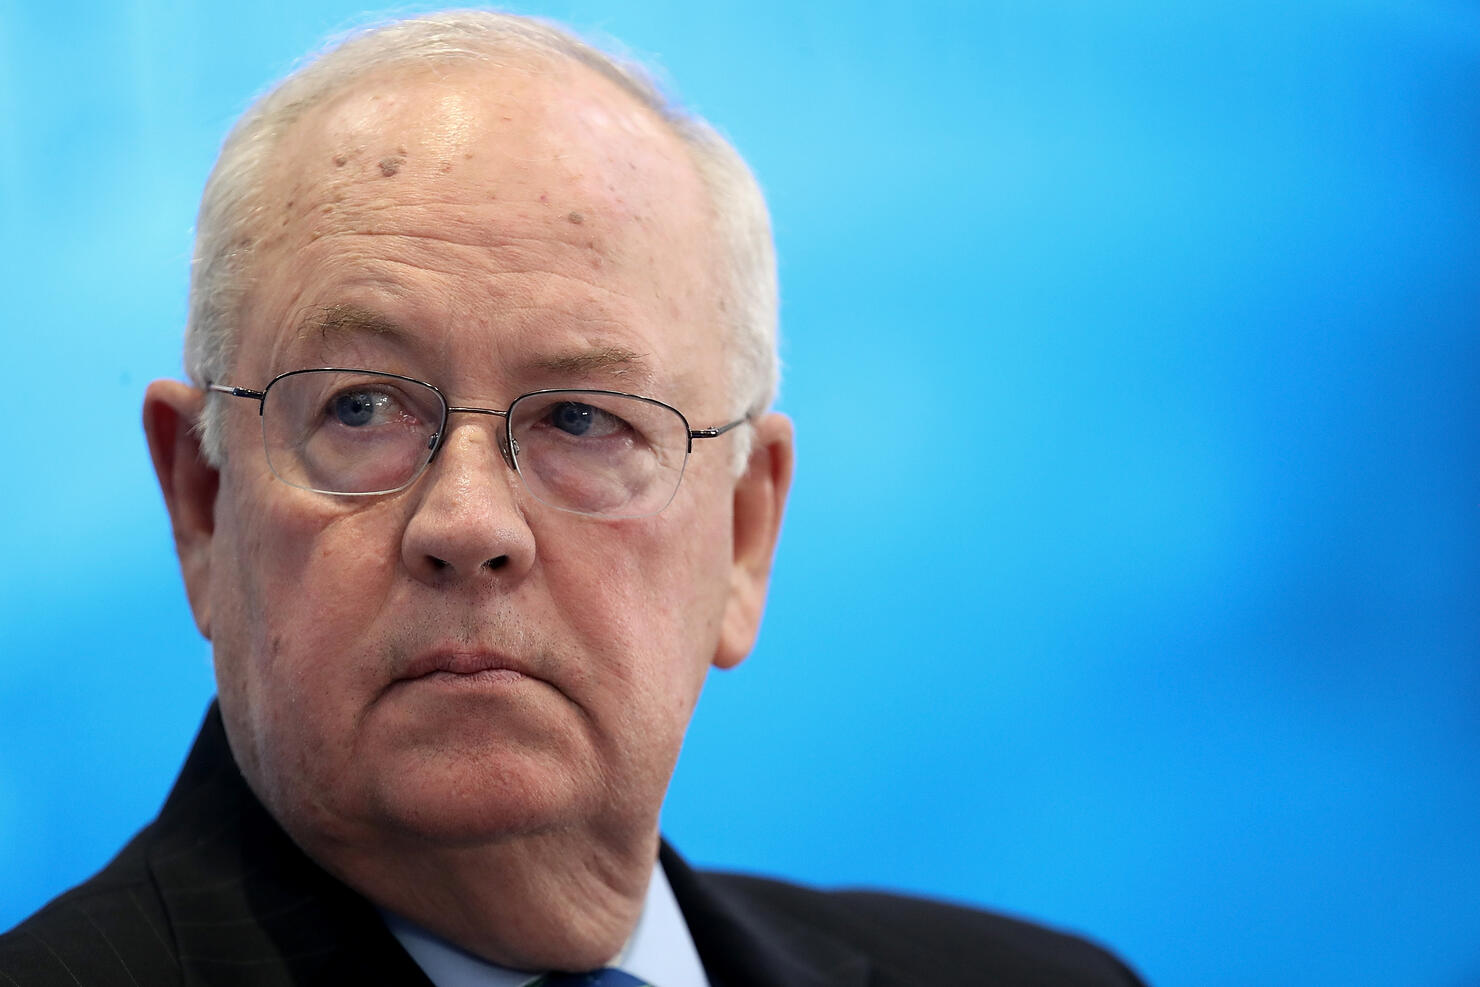 Former Independent Counsel Ken Starr Speaks On Special Counsels And The Presidency At The American Enterprise Institute